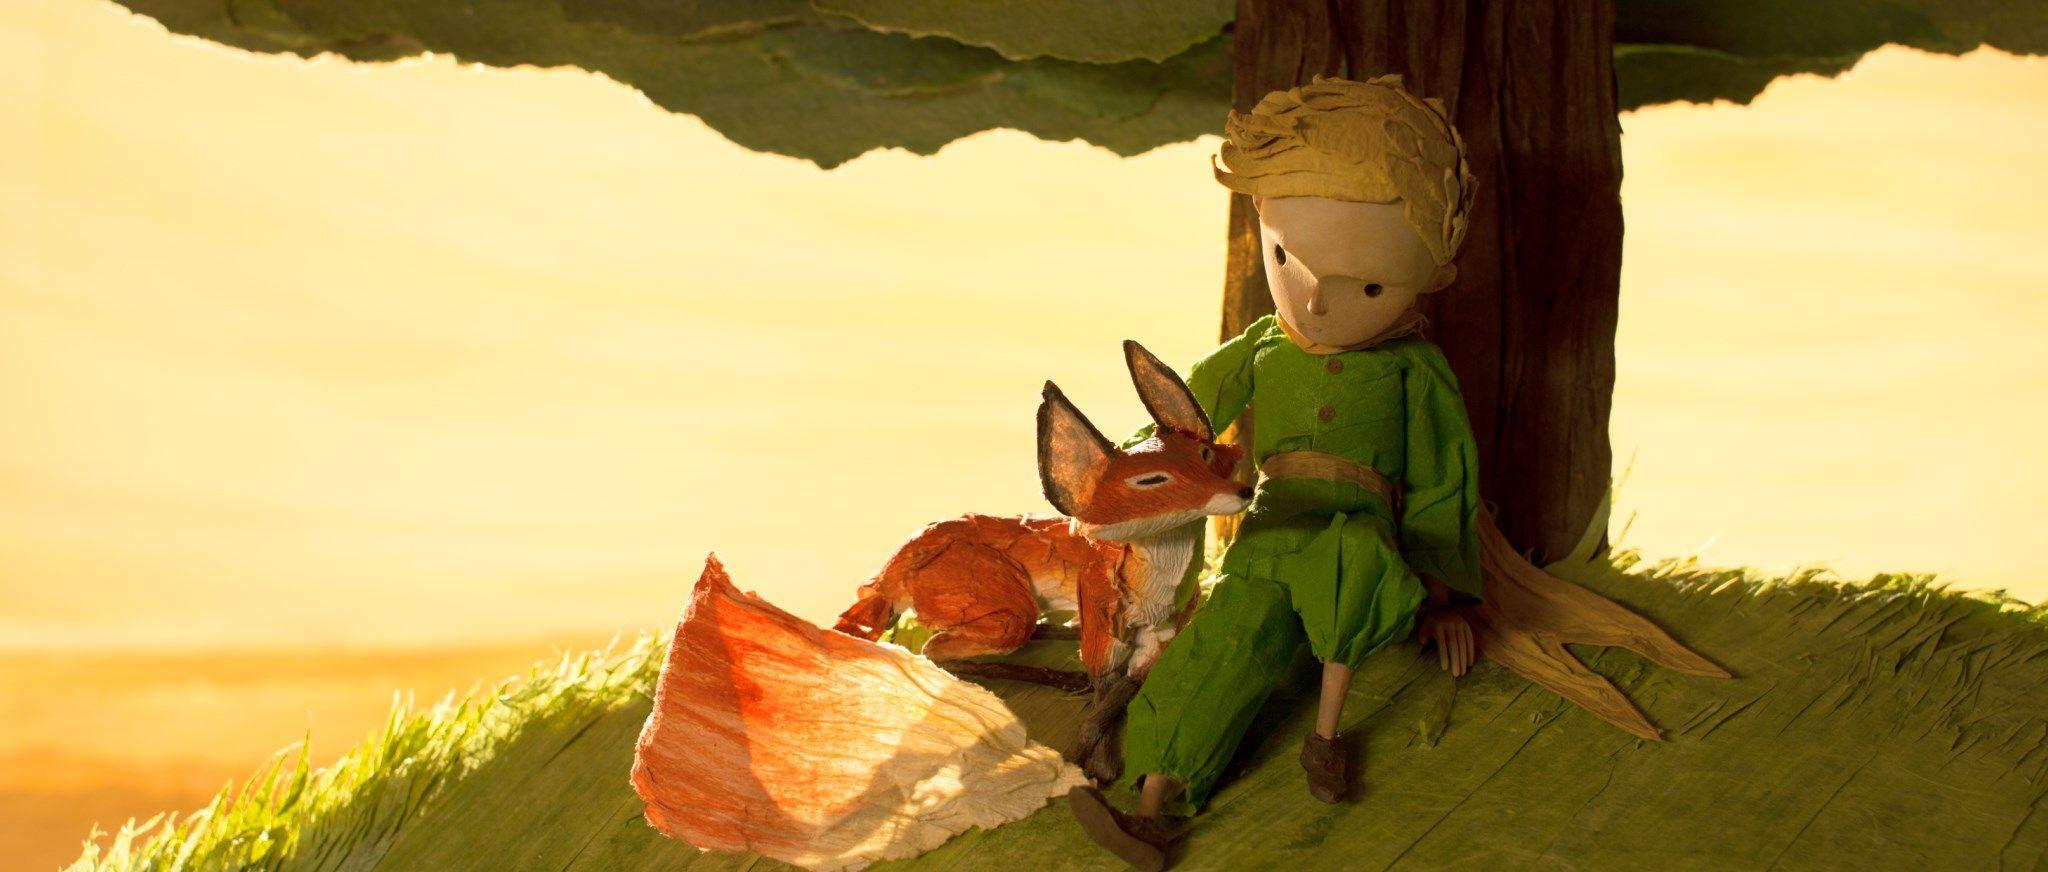 the little prince free HD widescreen Download Awesome collection